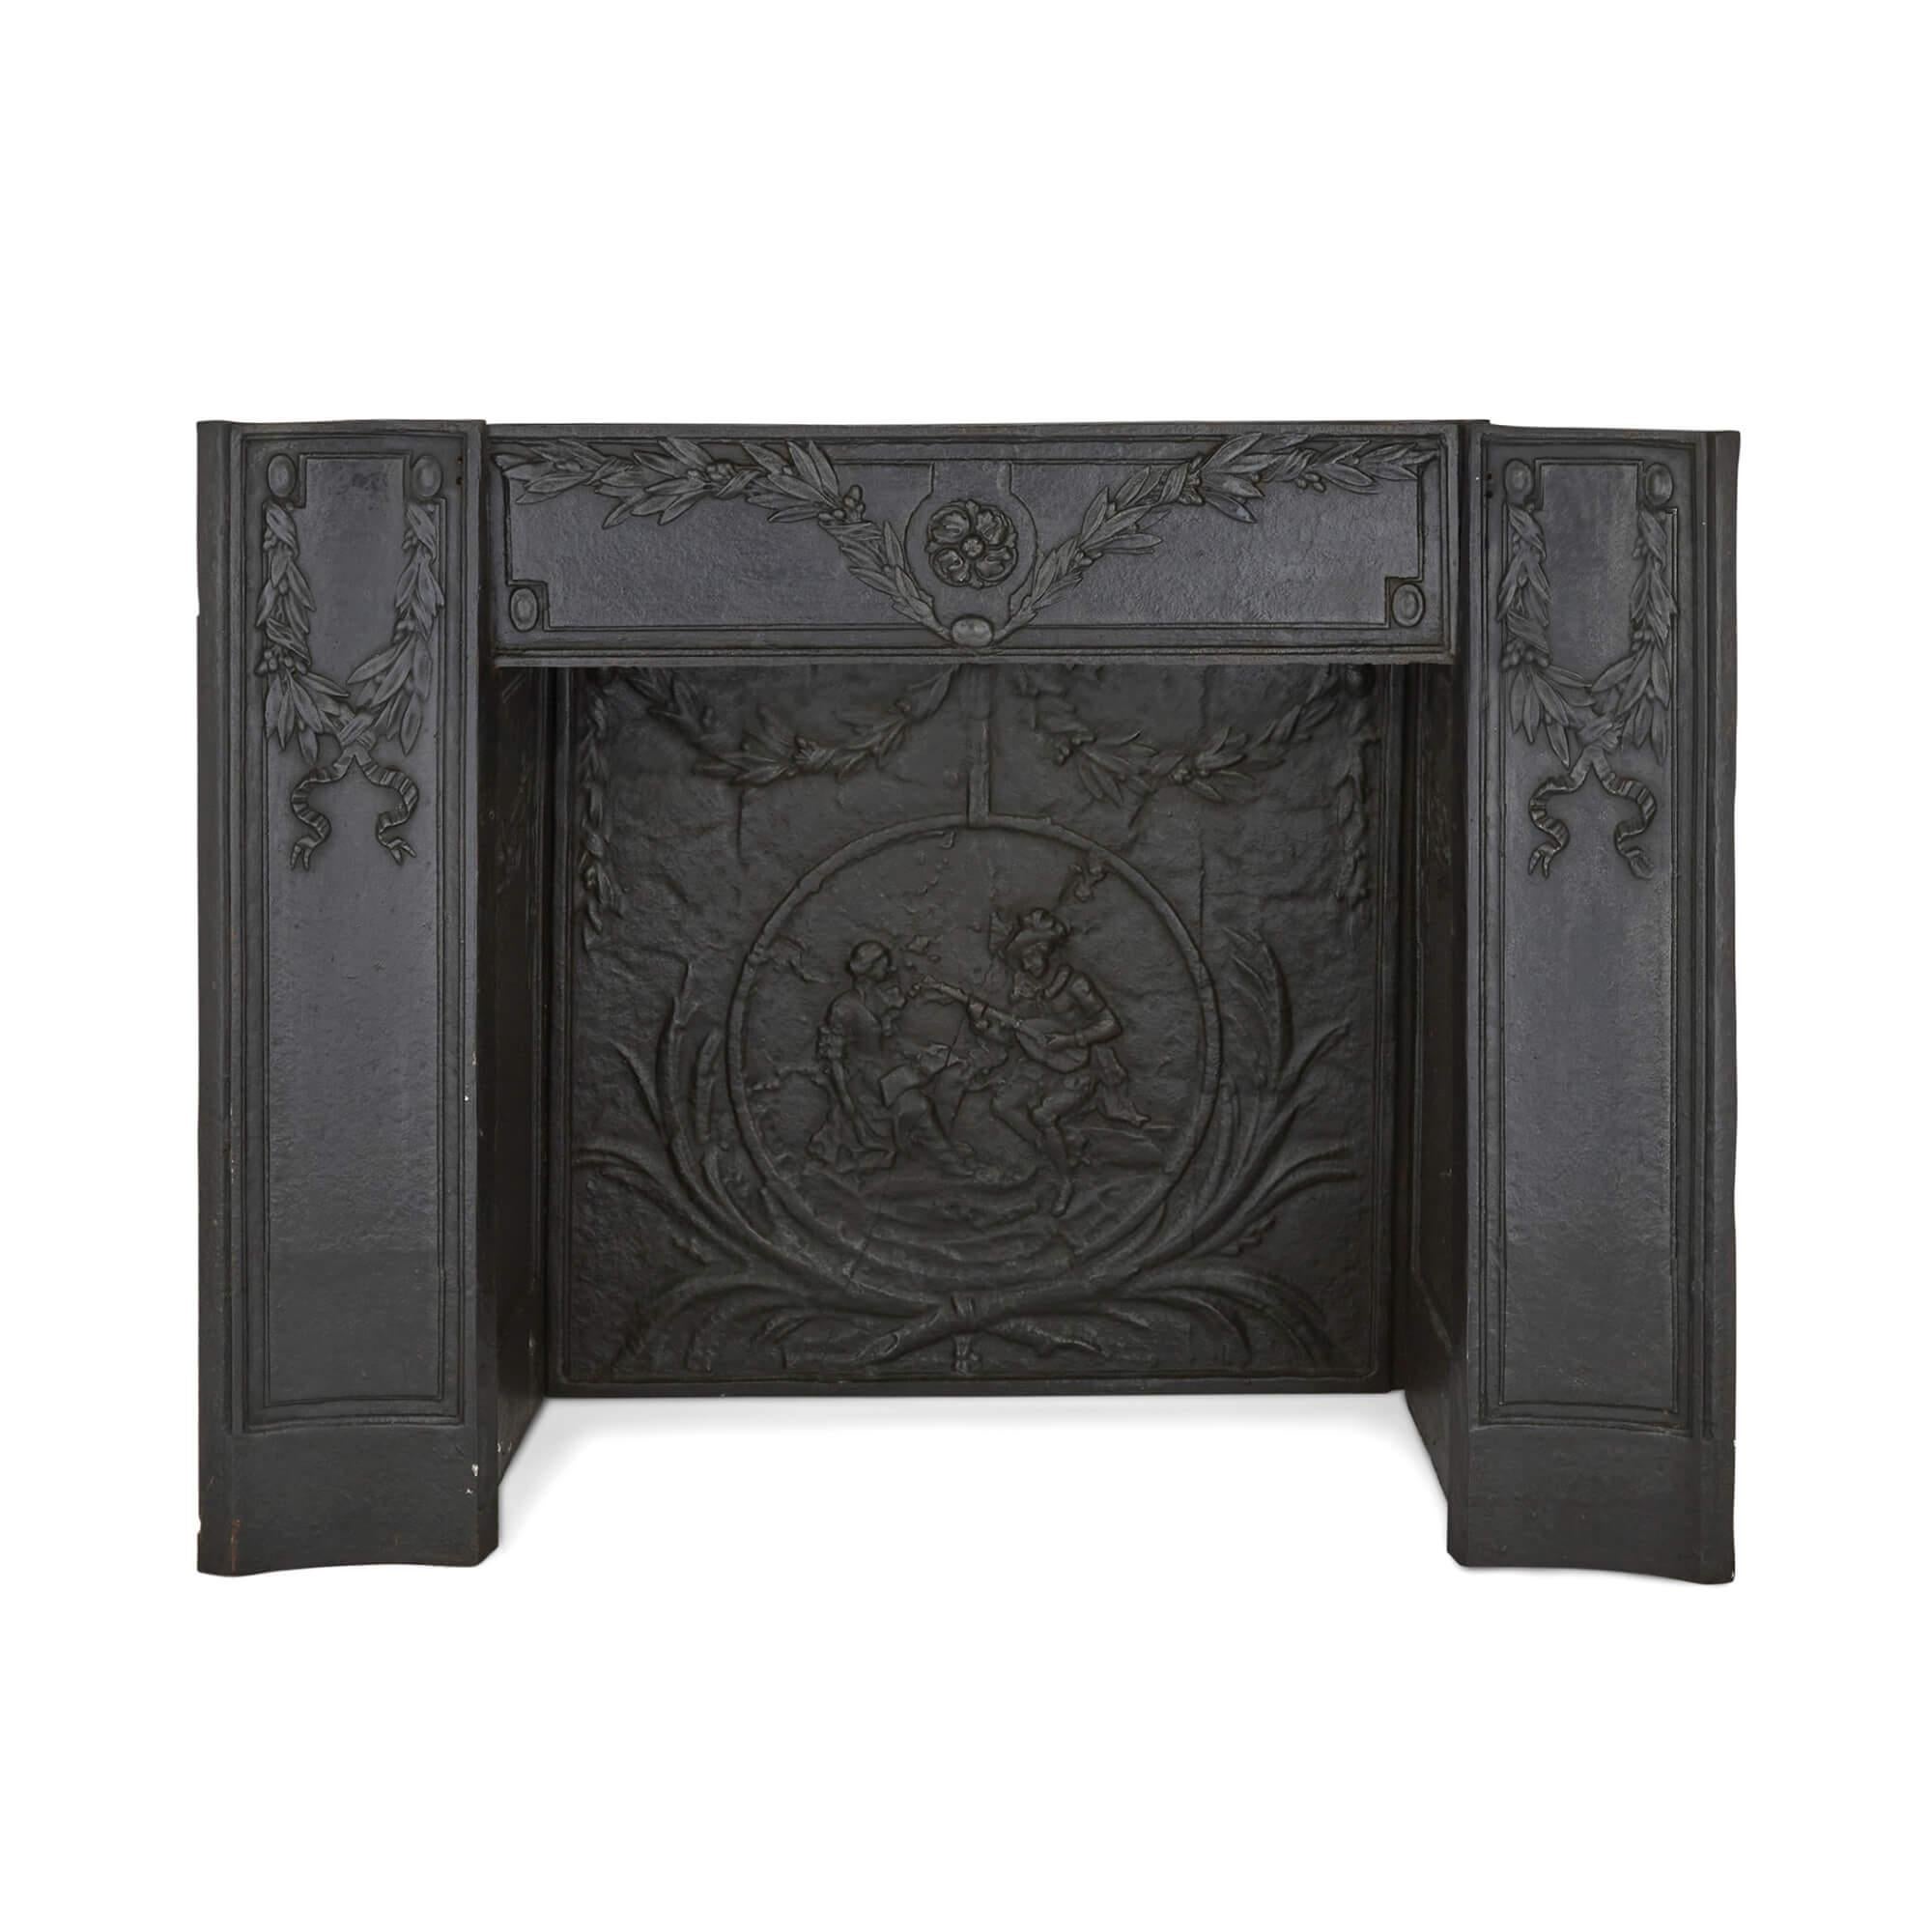 Empire Pair of Antique French Ormolu Mounted Marble Fireplaces with Cast Iron Insets For Sale